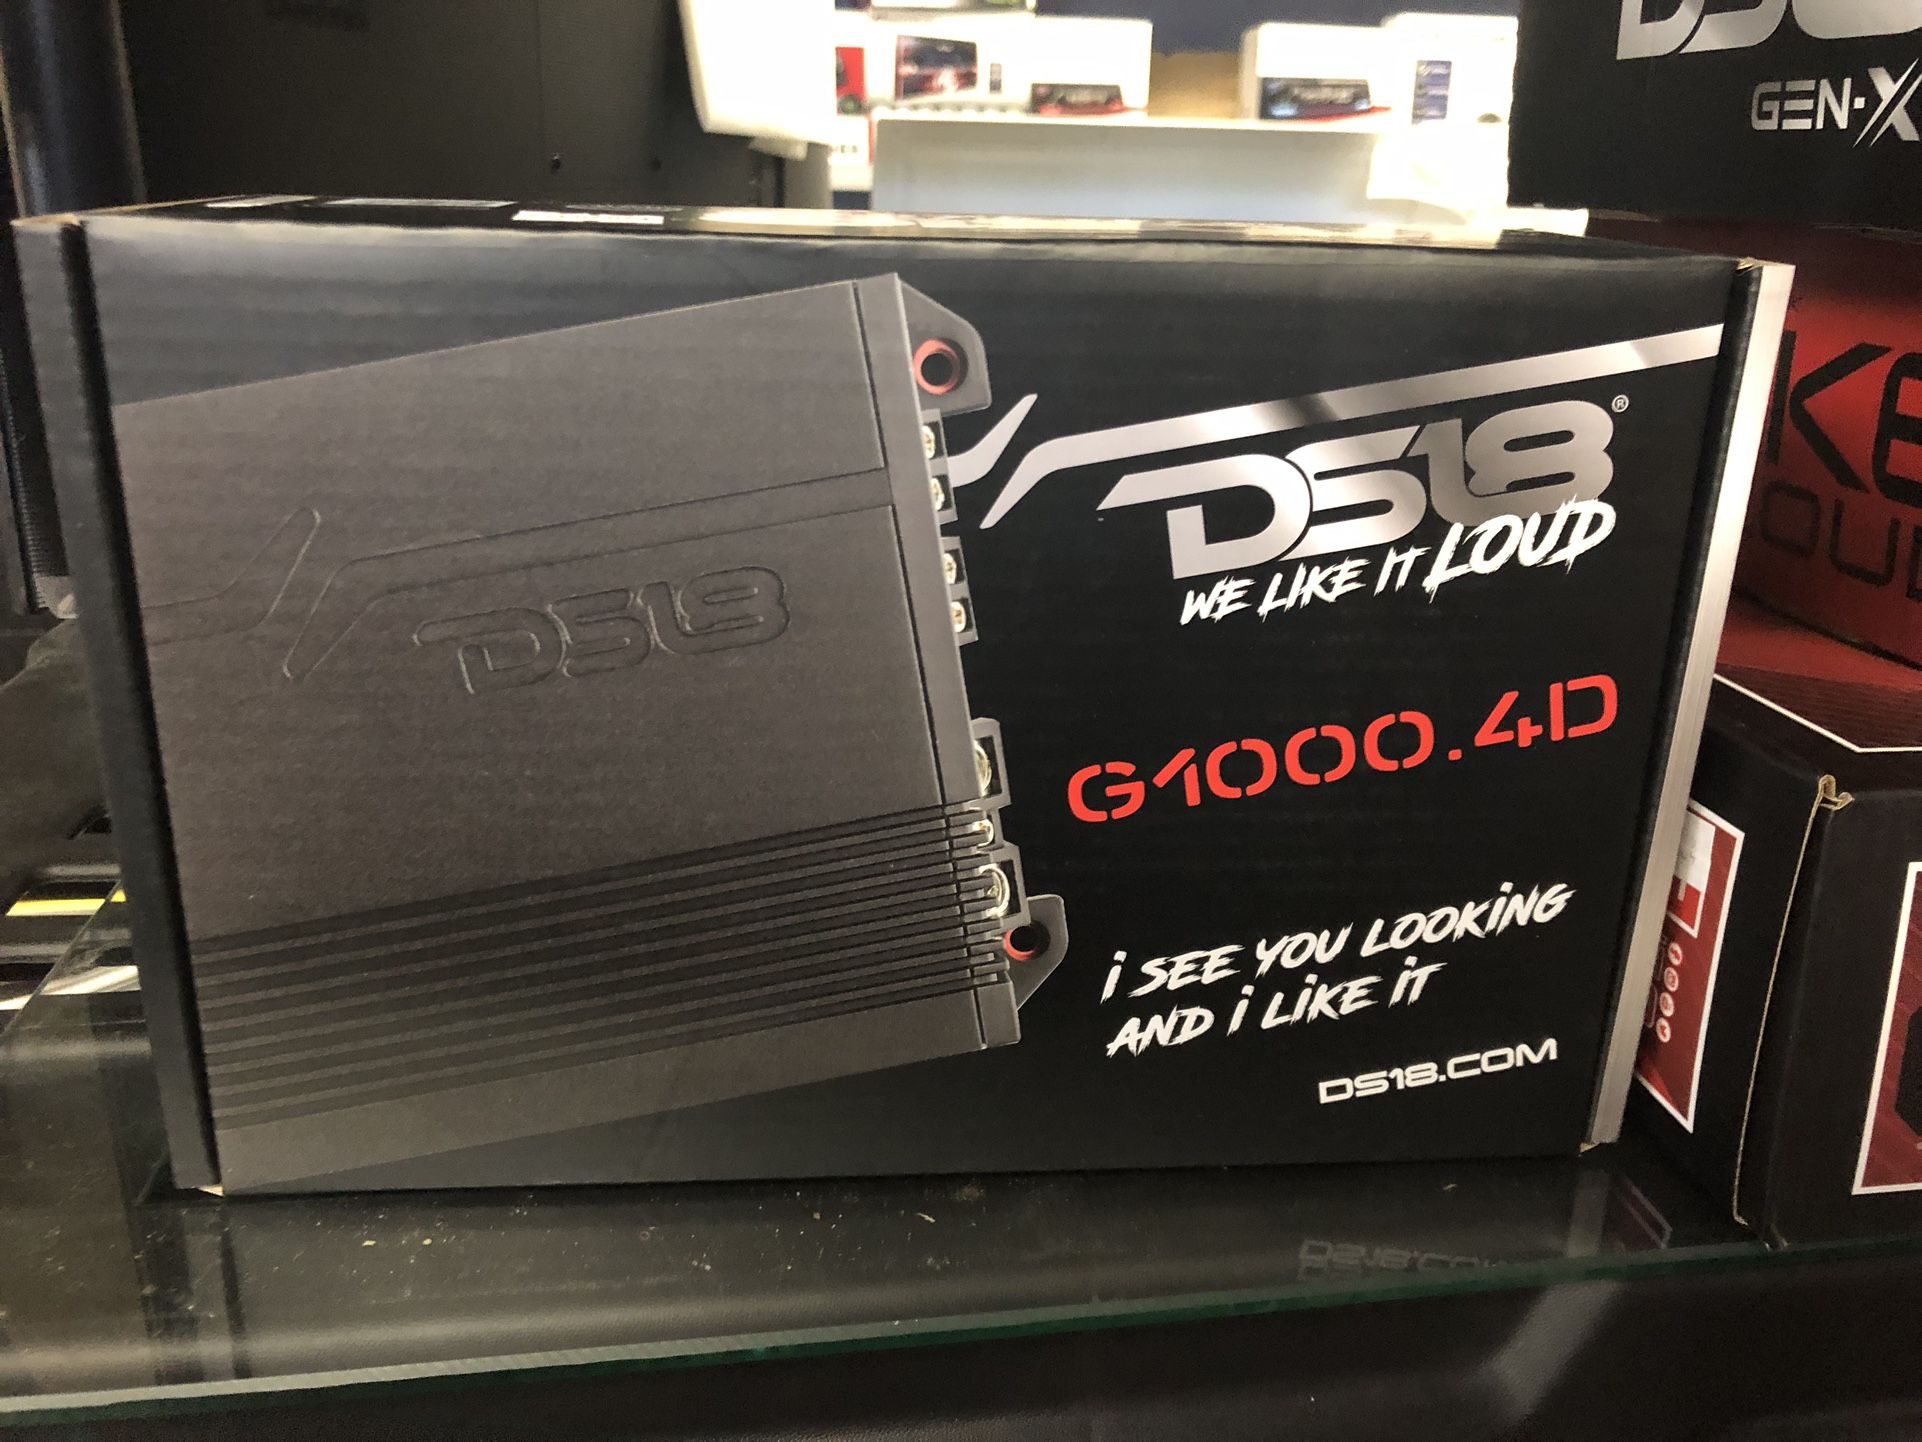 Ds18 G1000.4d On Sale Today For 129.99